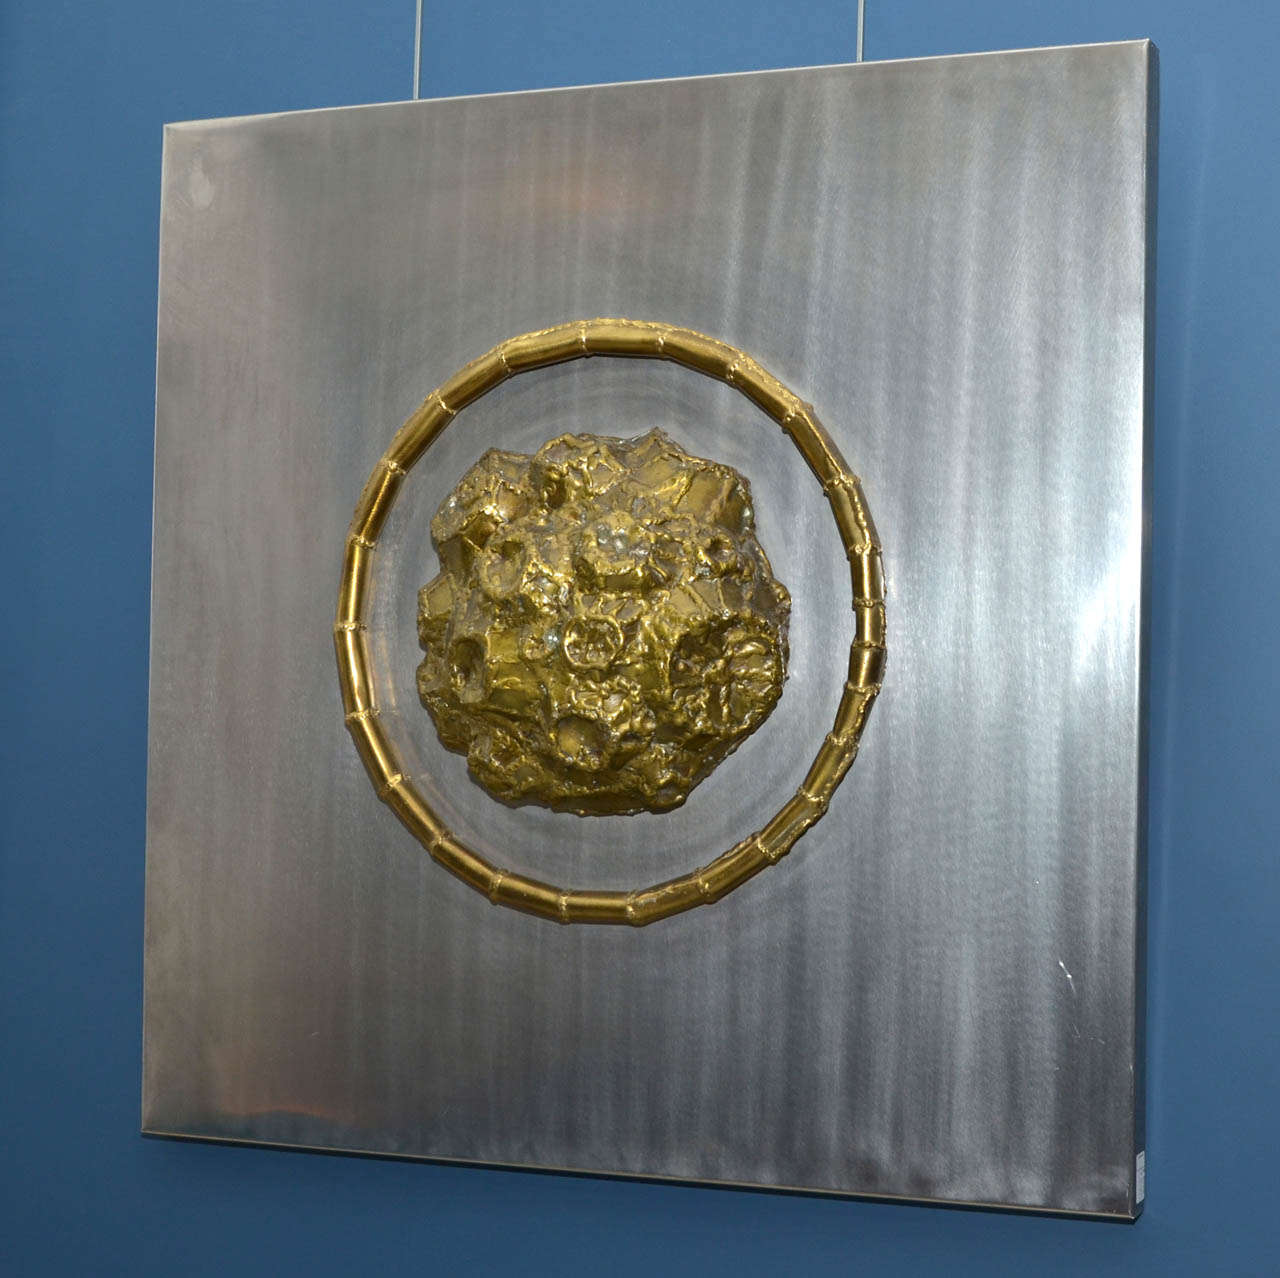 1969 panel sculpture signed Duval-Brasseur. Created by Jacques Duval-Brasseur. Stainless steel panel and brass meteorite sculpture. Normal wear consistent with age and use.